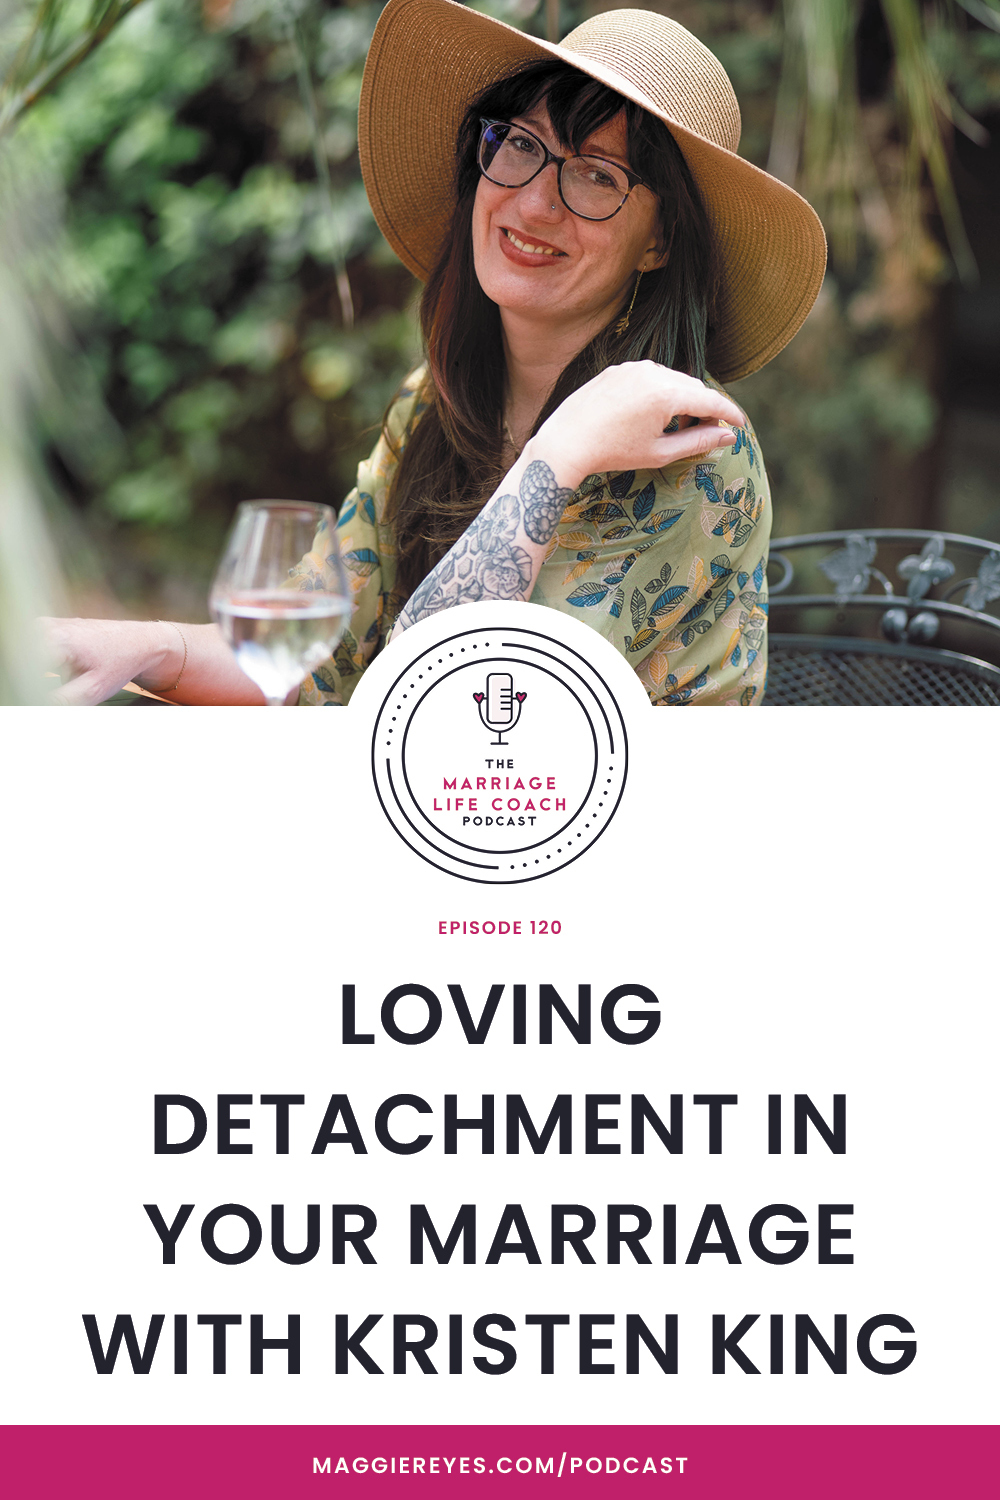 New Interview: How to Practice Loving Detachment in Your Marriage, on the Marriage Life Coach Podcast